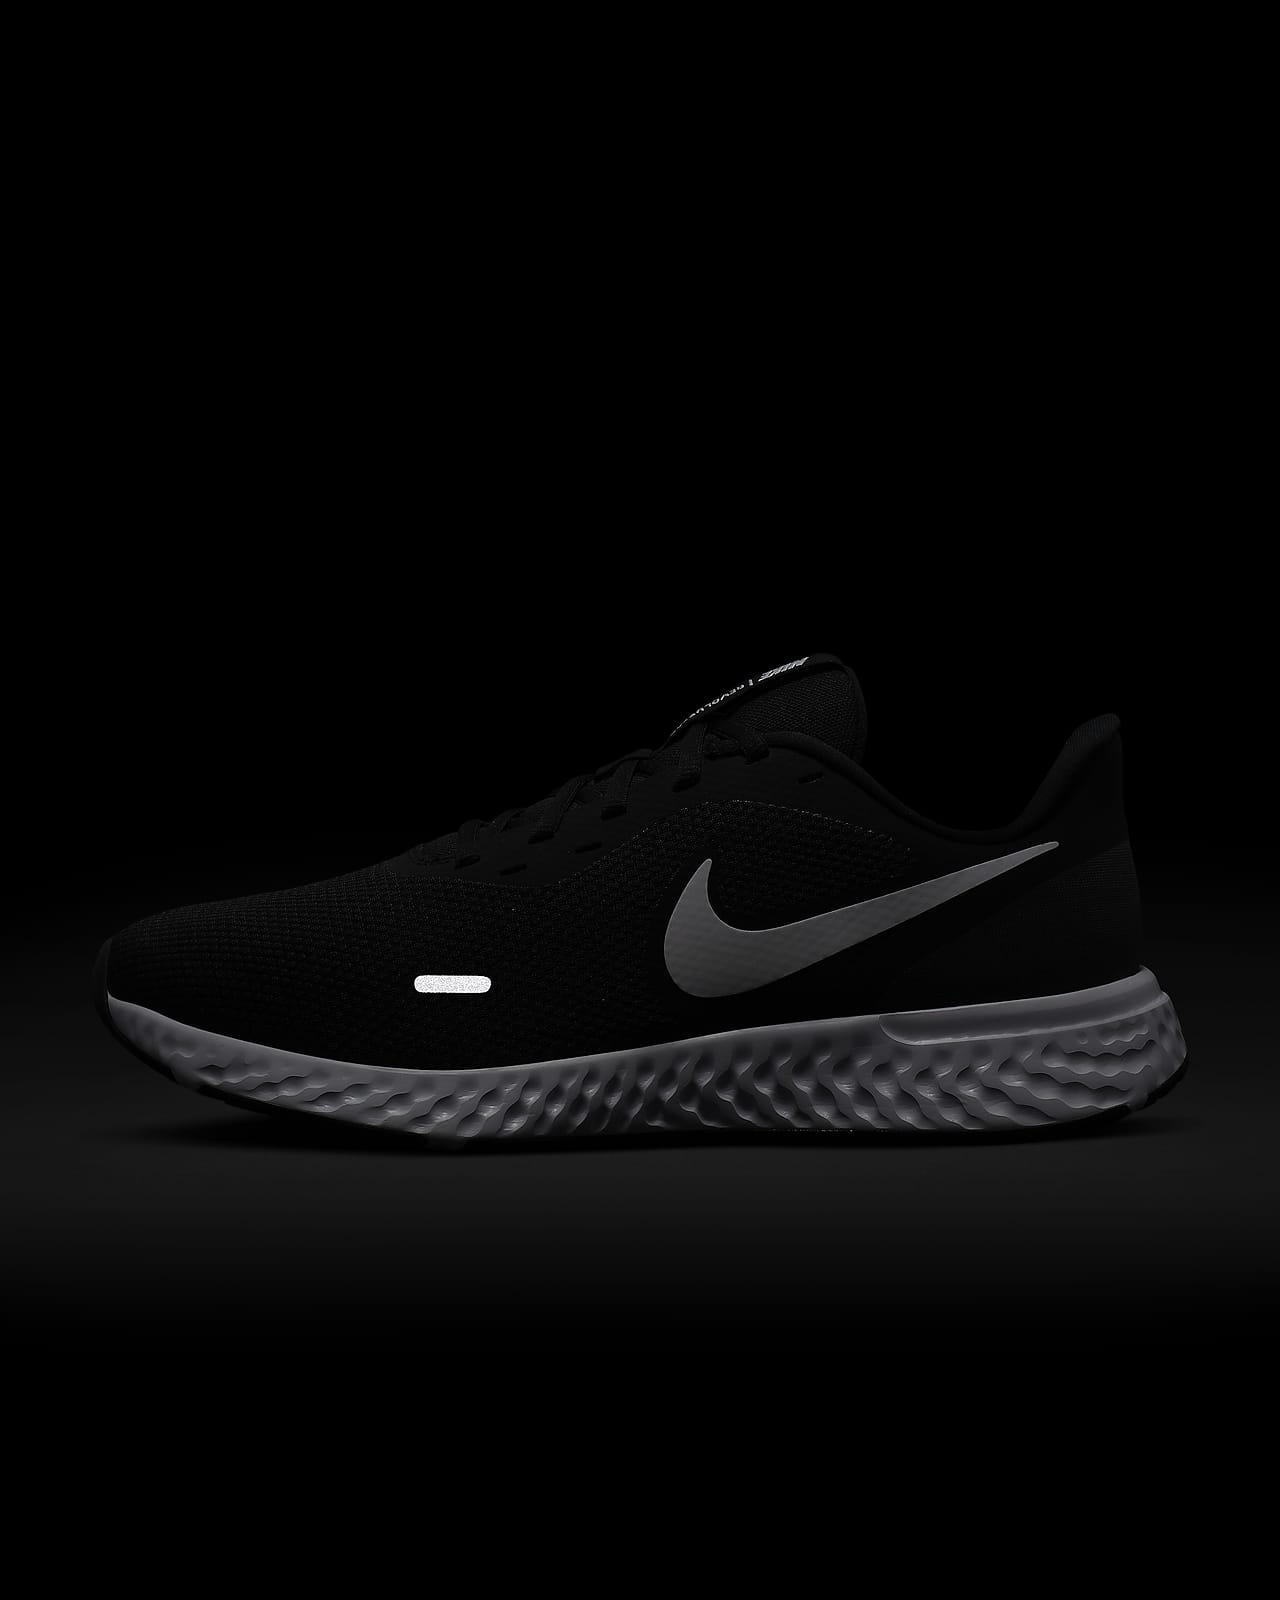 nike extra wide men's running shoes